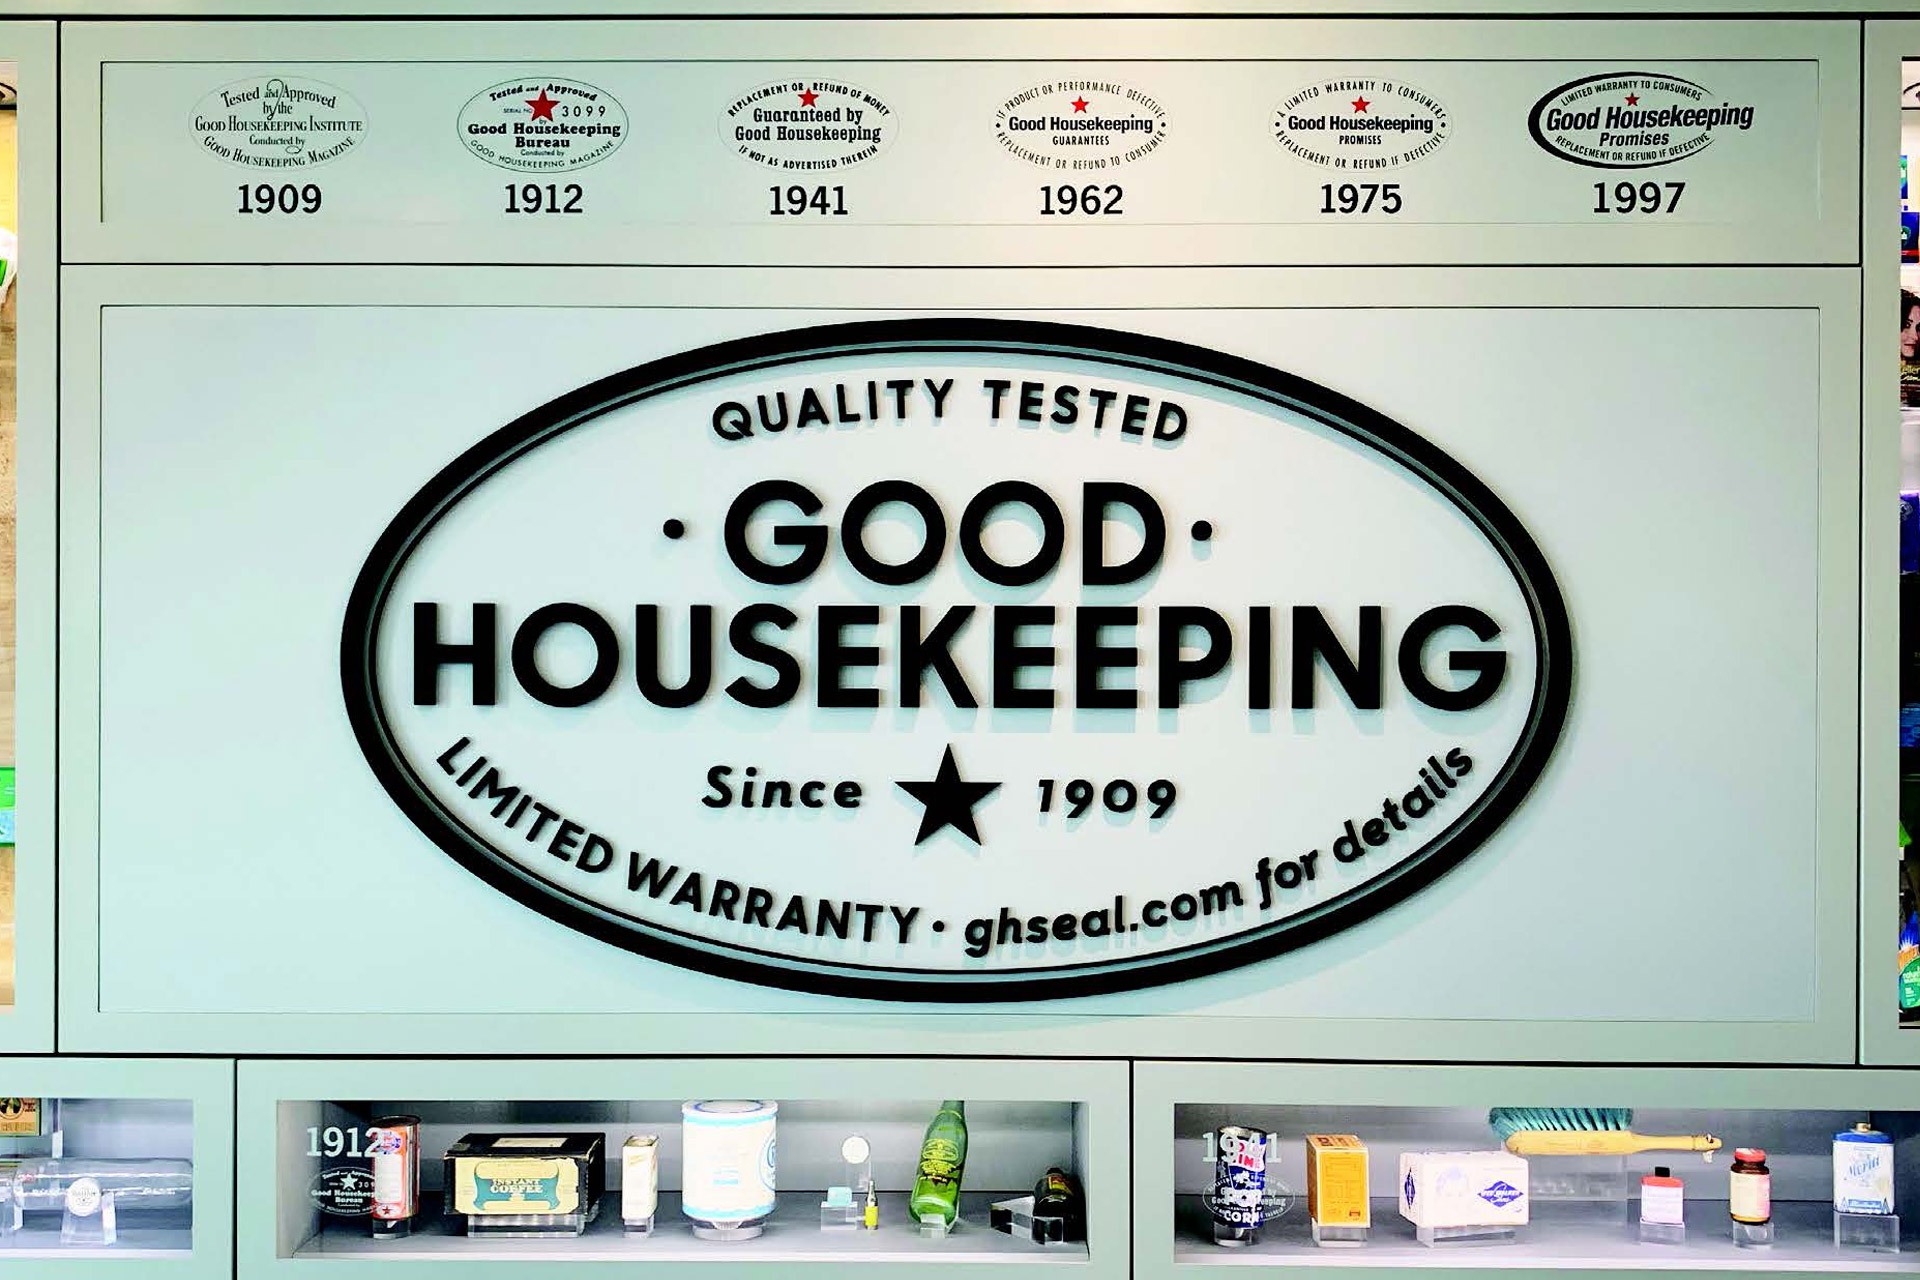 Good Housekeeping Seal of Approval: Why Choose These Products